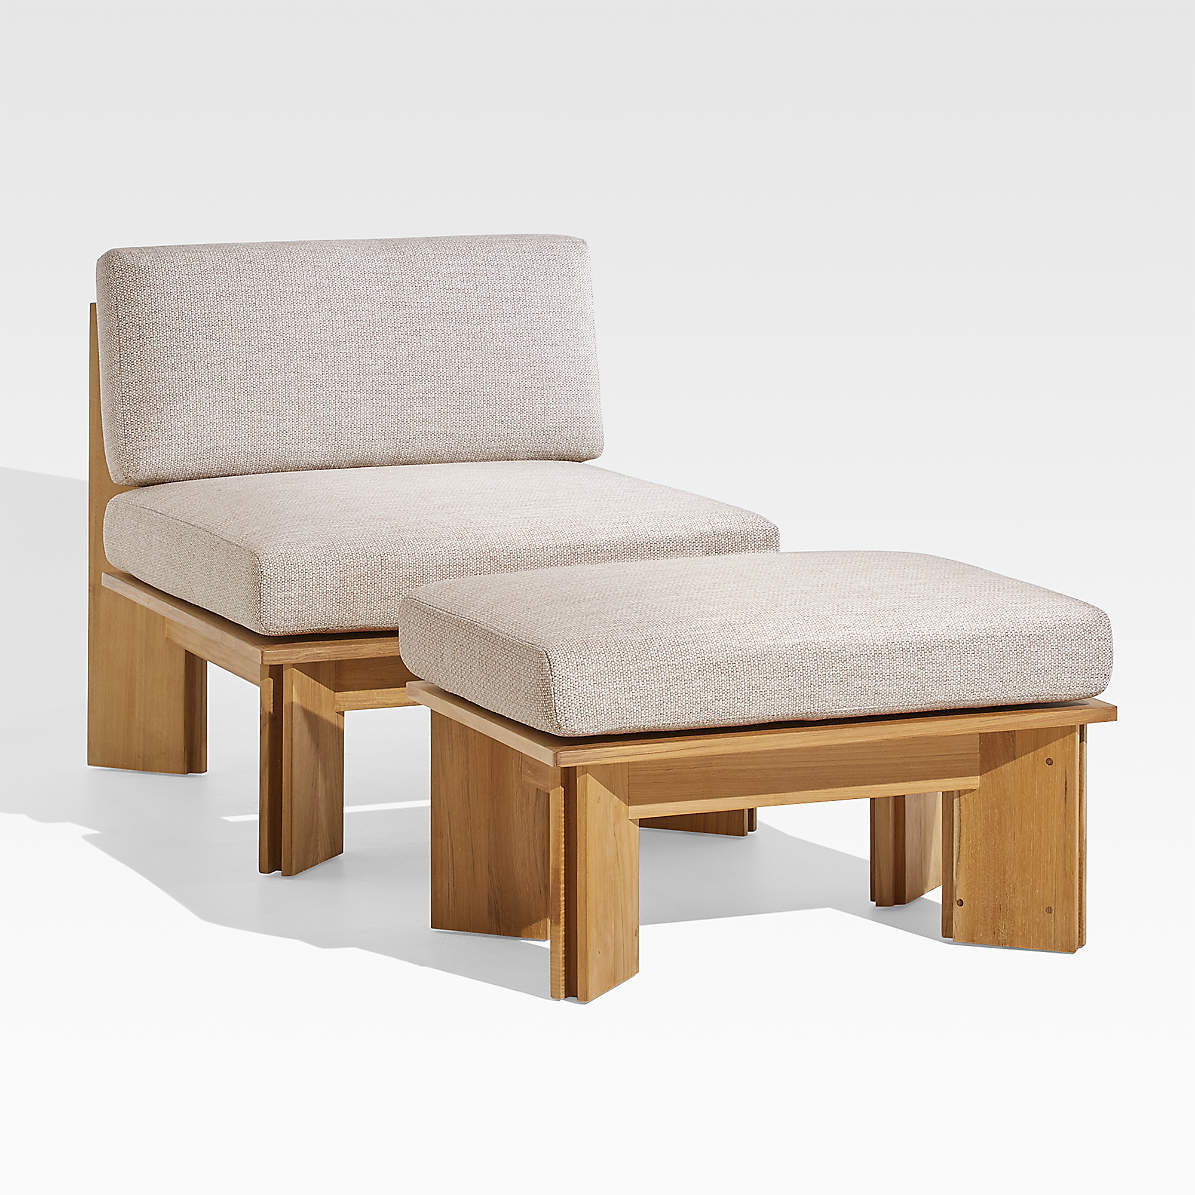 Olivos Teak Outdoor Lounge Chair With Ottoman Crate And Barrel